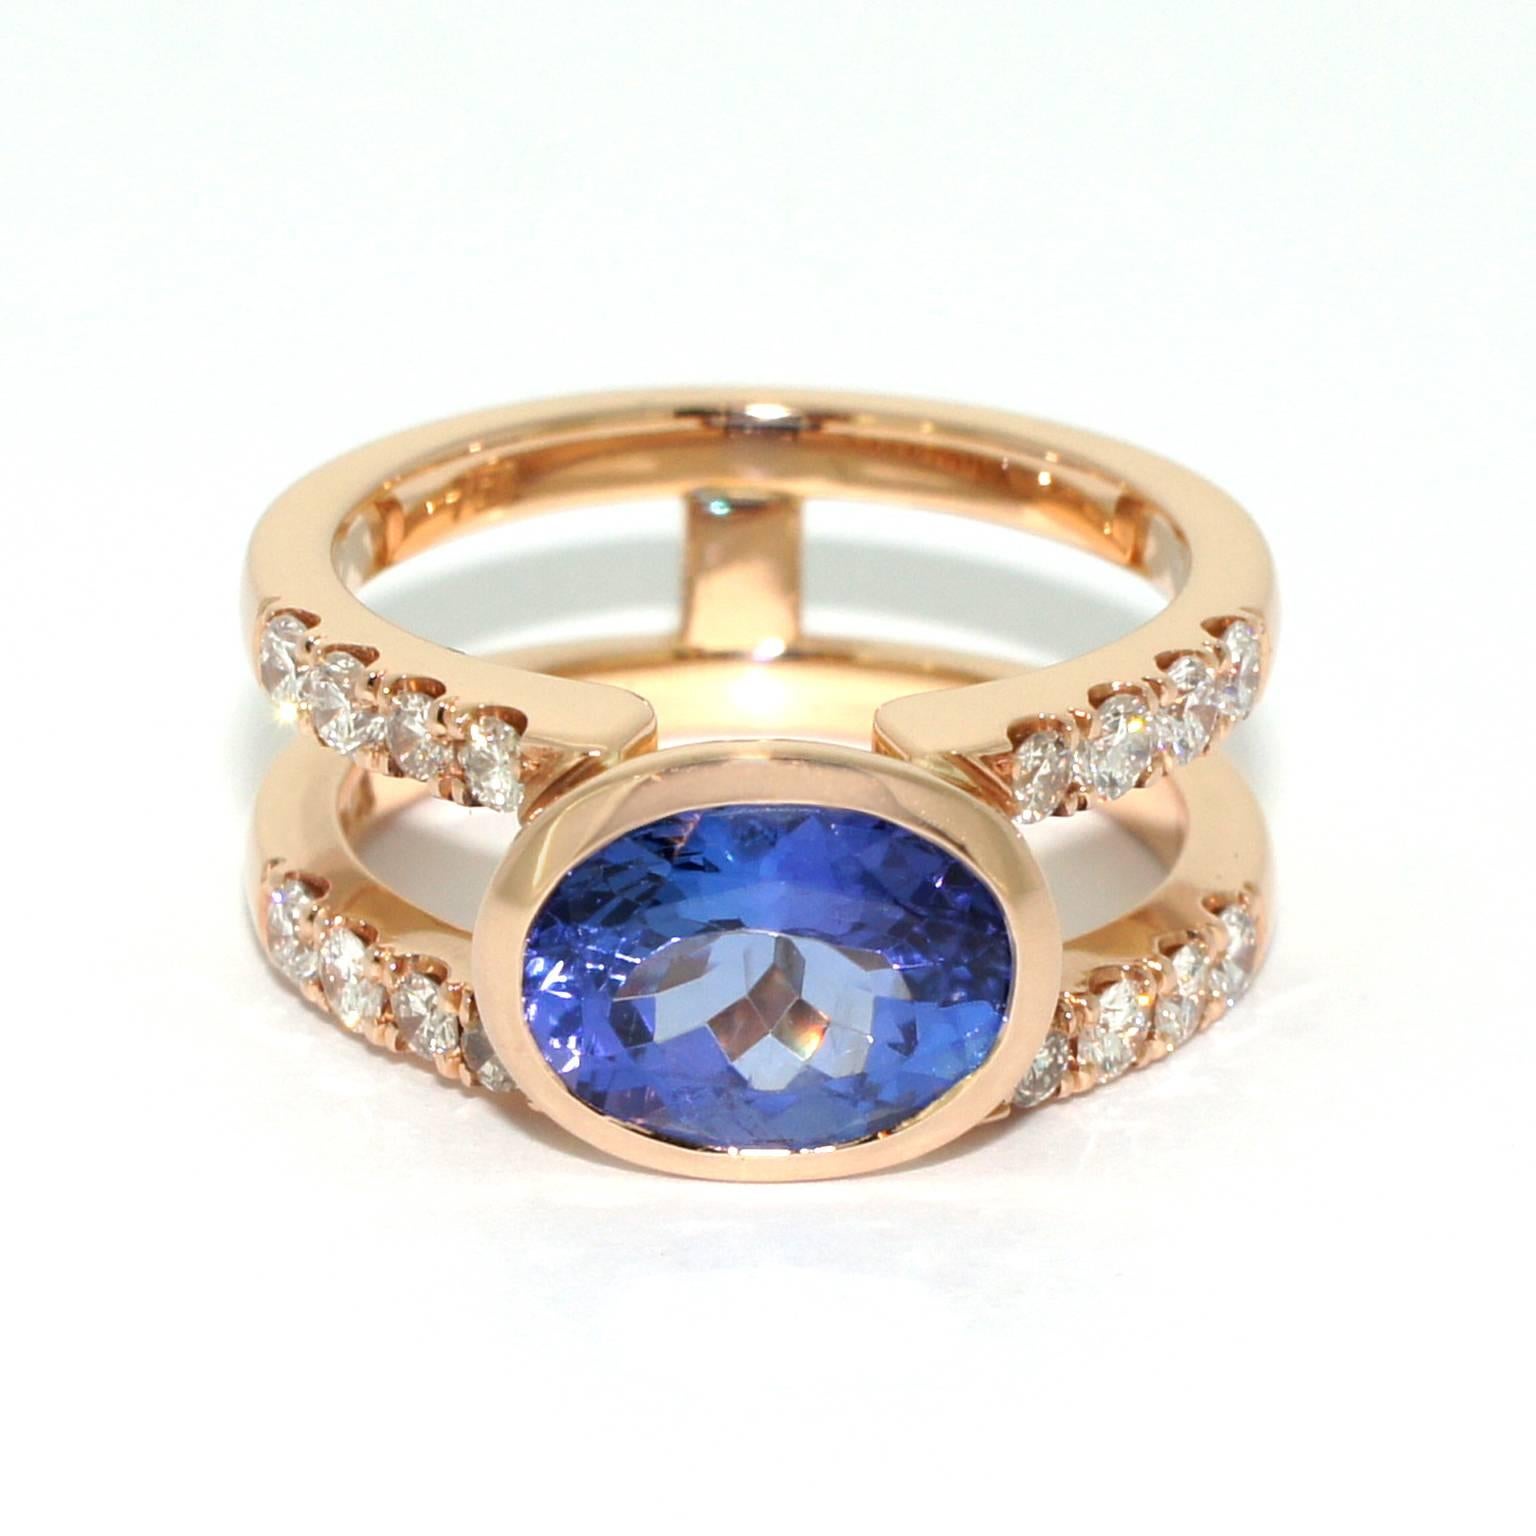 This gorgeous double band ring is handmade to order in our Sydney studios in 18 karat rose gold. Set with a beautiful, saturated purple-blue 5-carat tanzanite and 0.42 carat of F VS diamonds, this ring is a timeless contemporary heirloom.

This ring